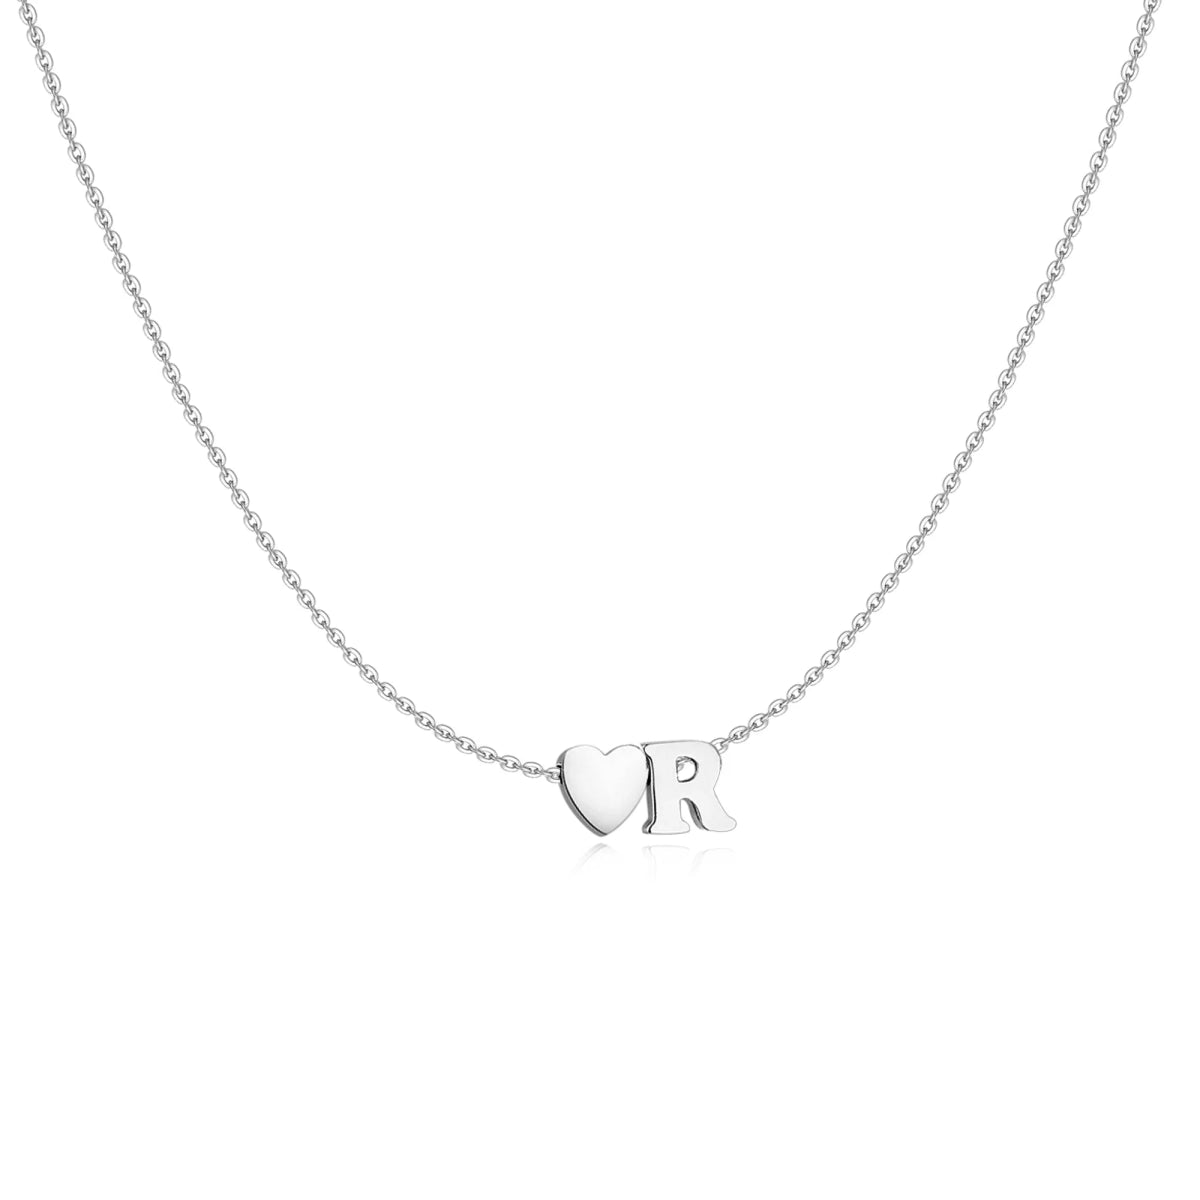 925 Sterling Silver Initial Letter R in Rope Circle Charm Pendant Necklace  | eBay